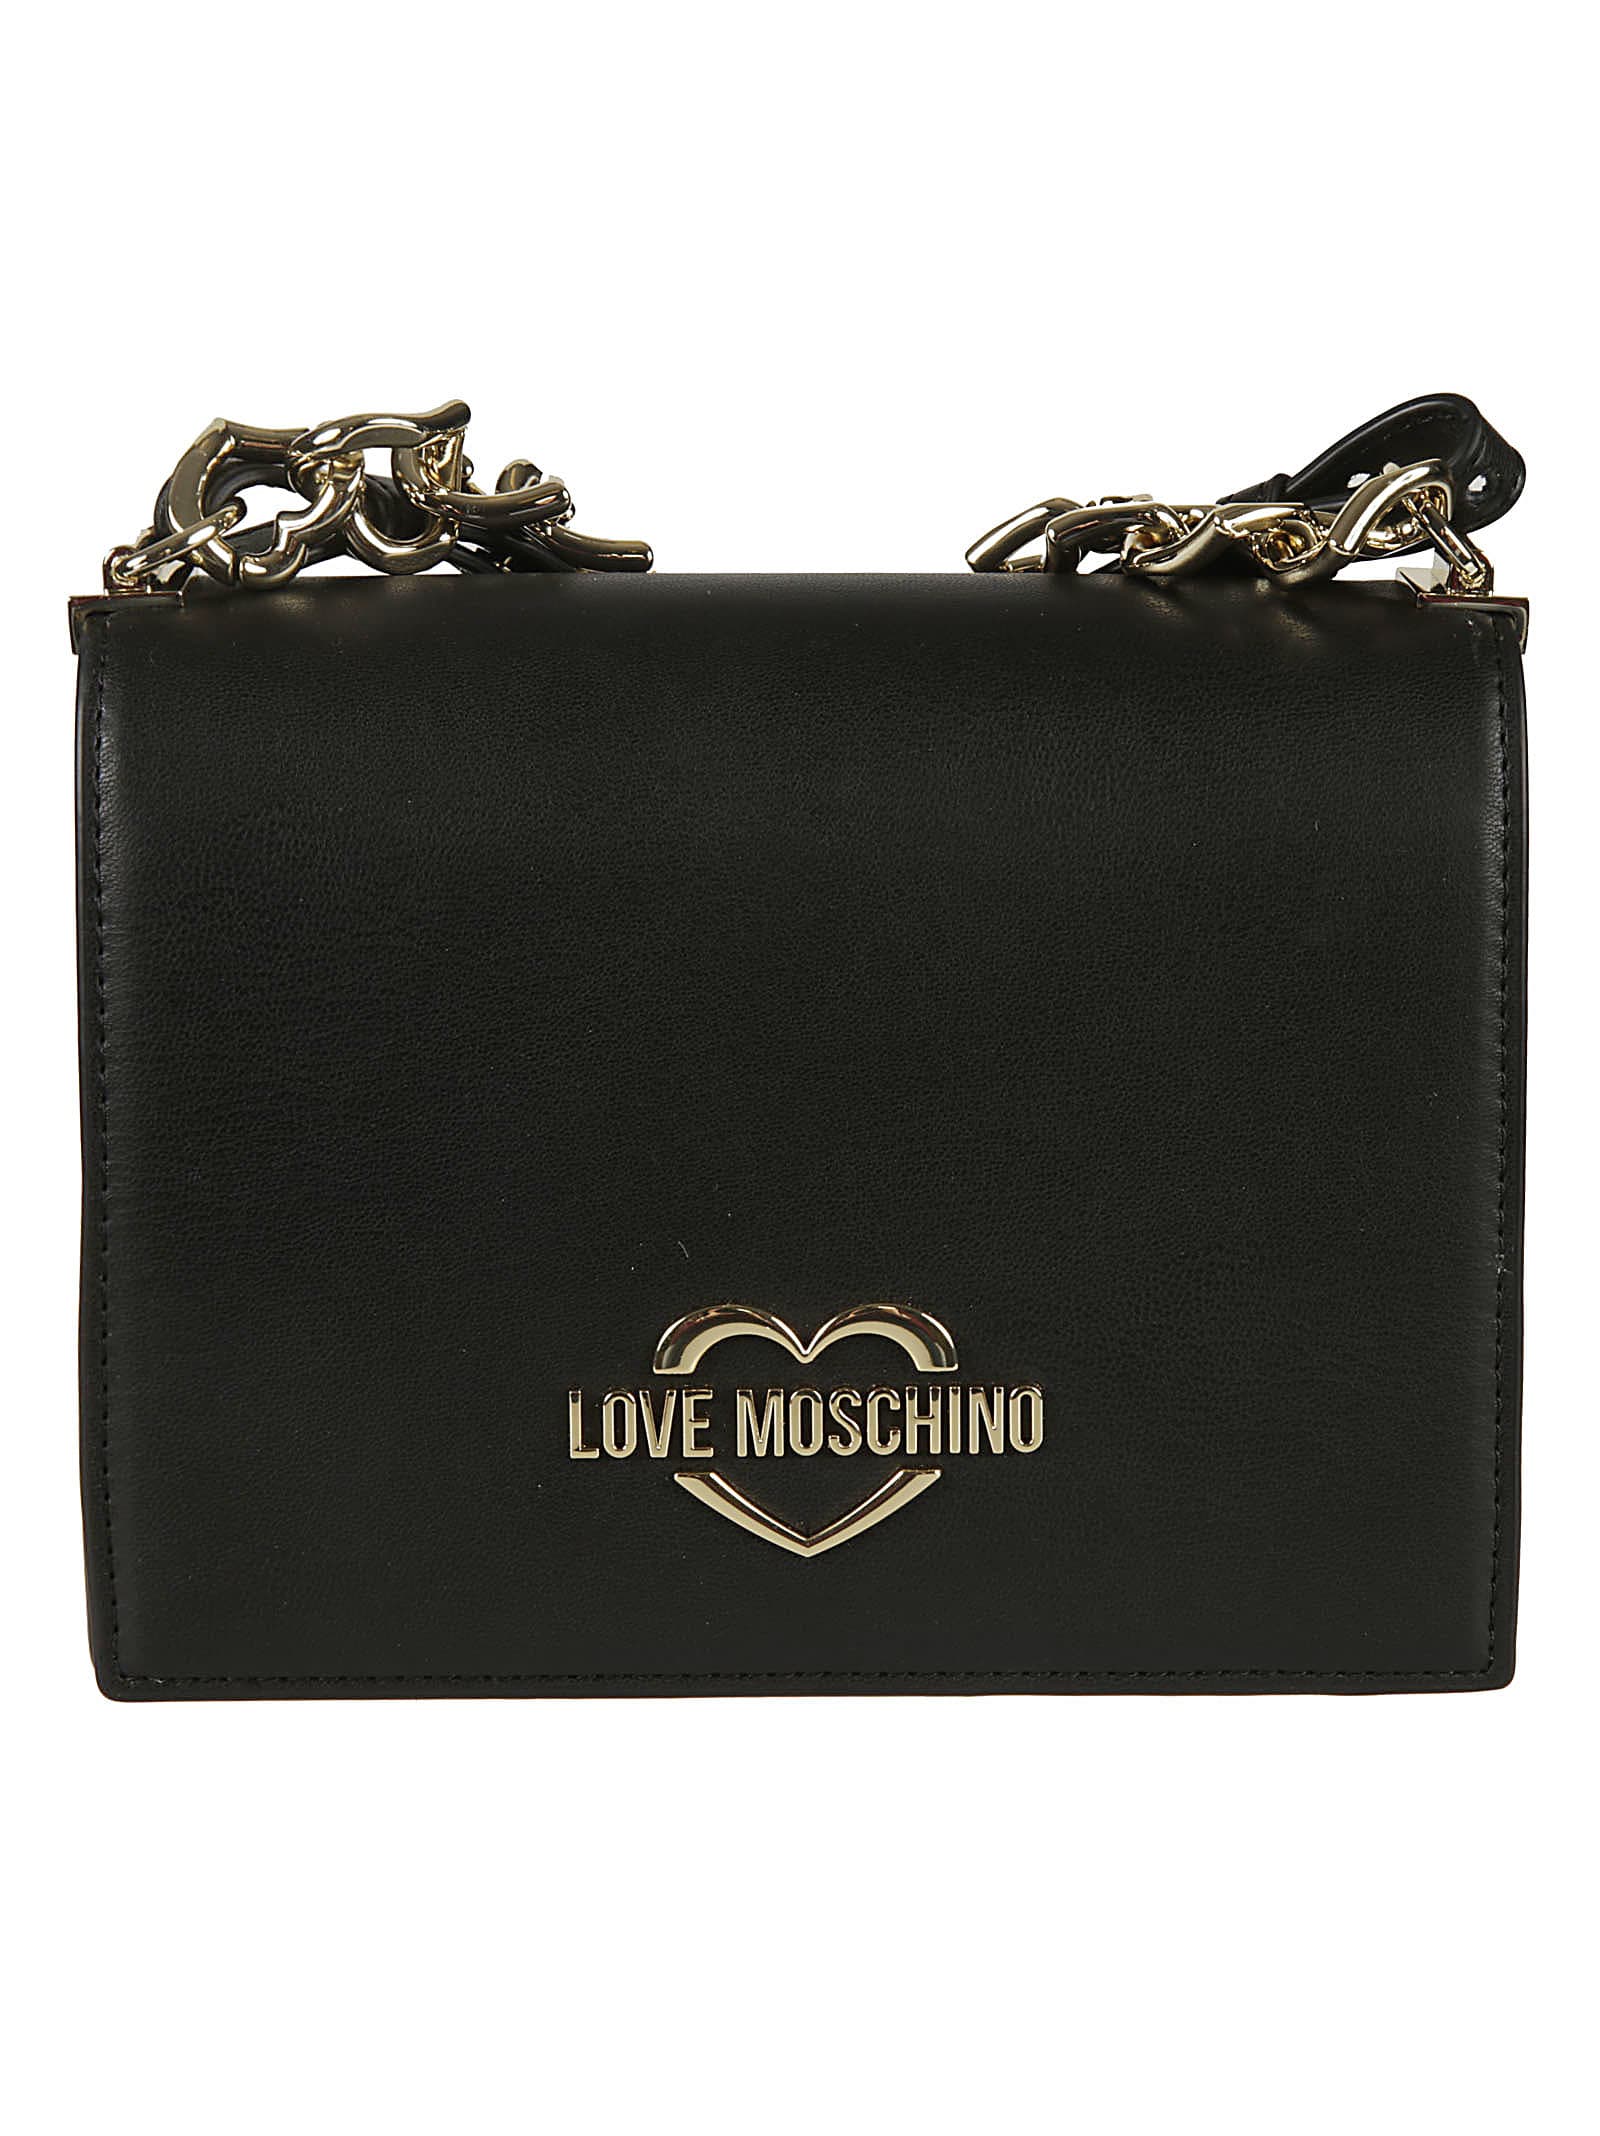 Love Moschino Flap Chain & Leather Shoulder Bag In Black | ModeSens